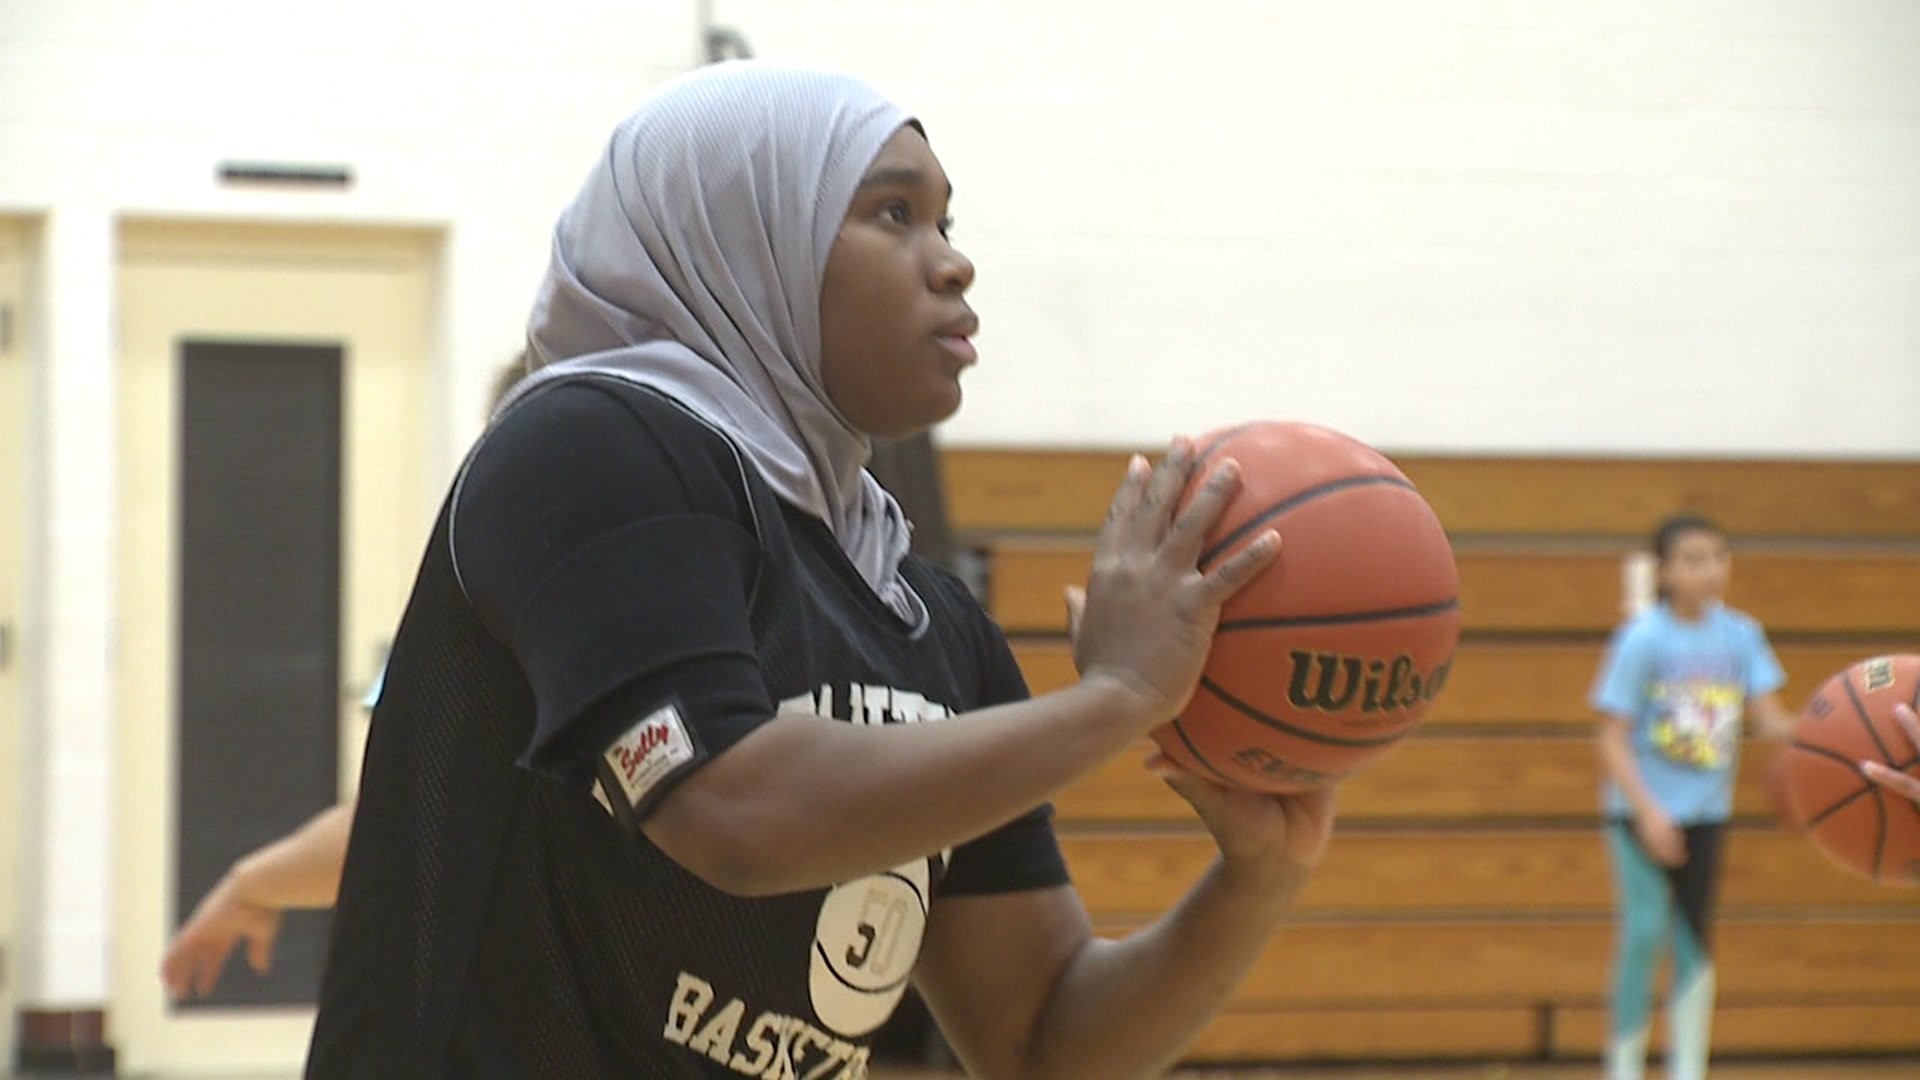 UT basketball player breaks barriers playing with hijab